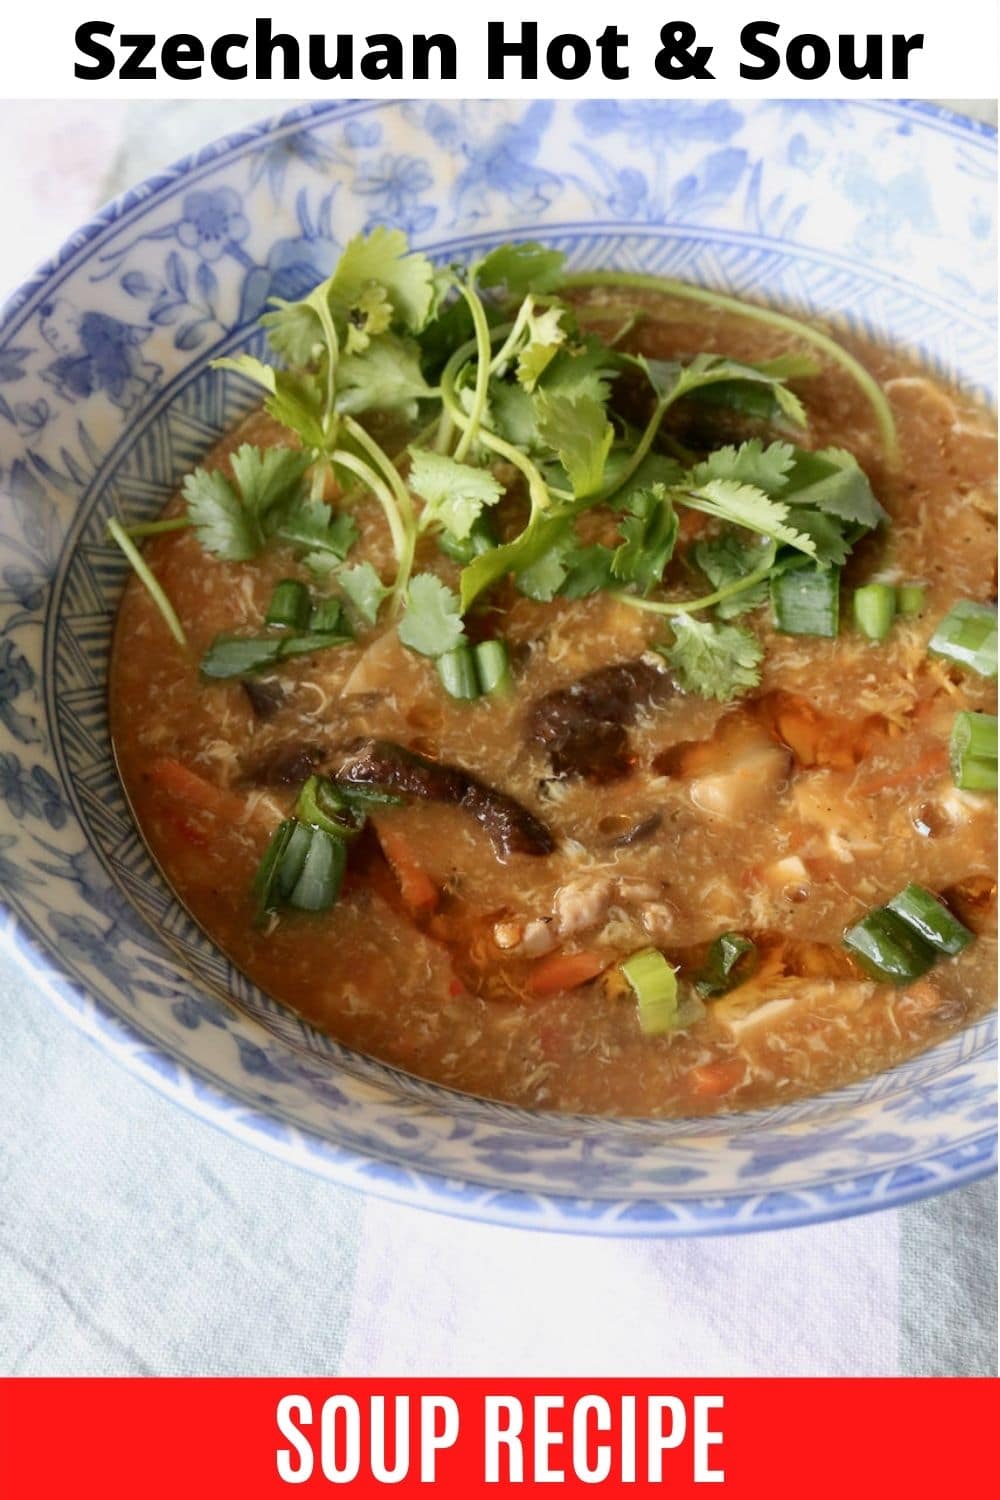 Spicy Szechuan Hot and Sour Soup Recipe